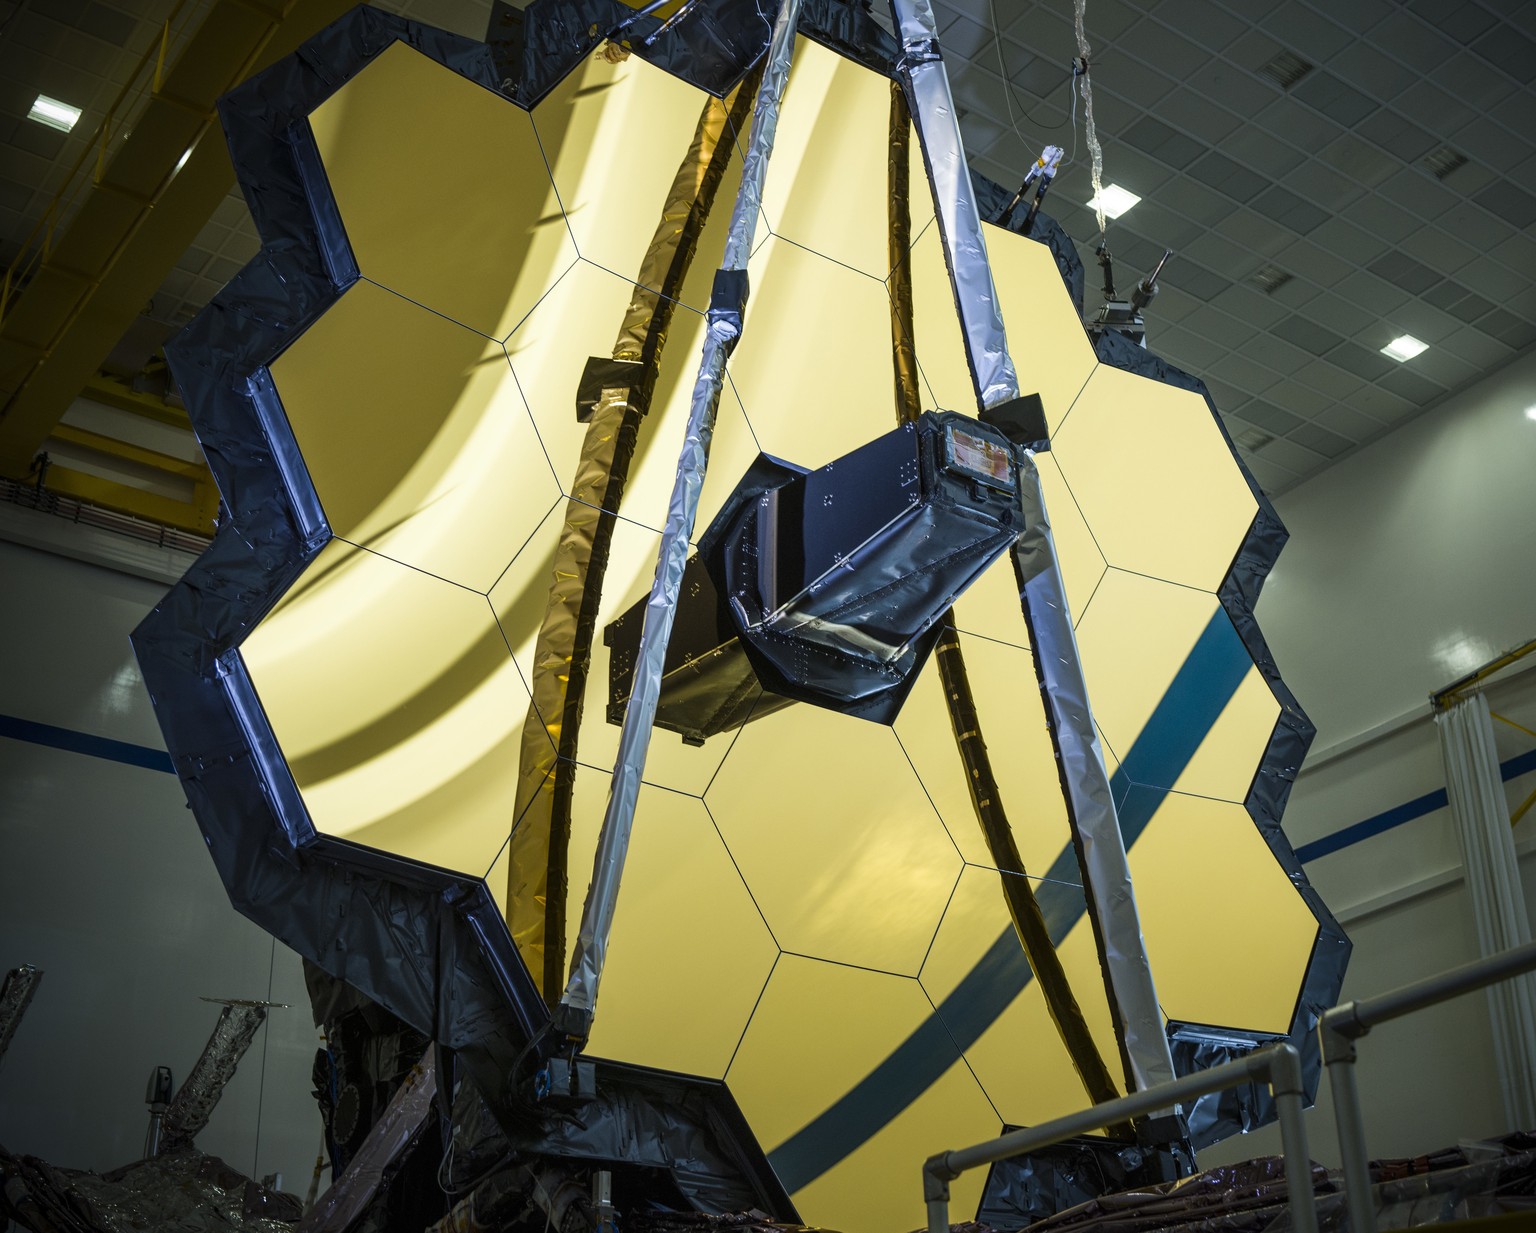 This March 5, 2020 photo made availalble by NASA shows the main mirror assembly of the James Webb Space Telescope during testing at a Northrop Grumman facility in Redondo Beach, Calif. Webb will attem ...